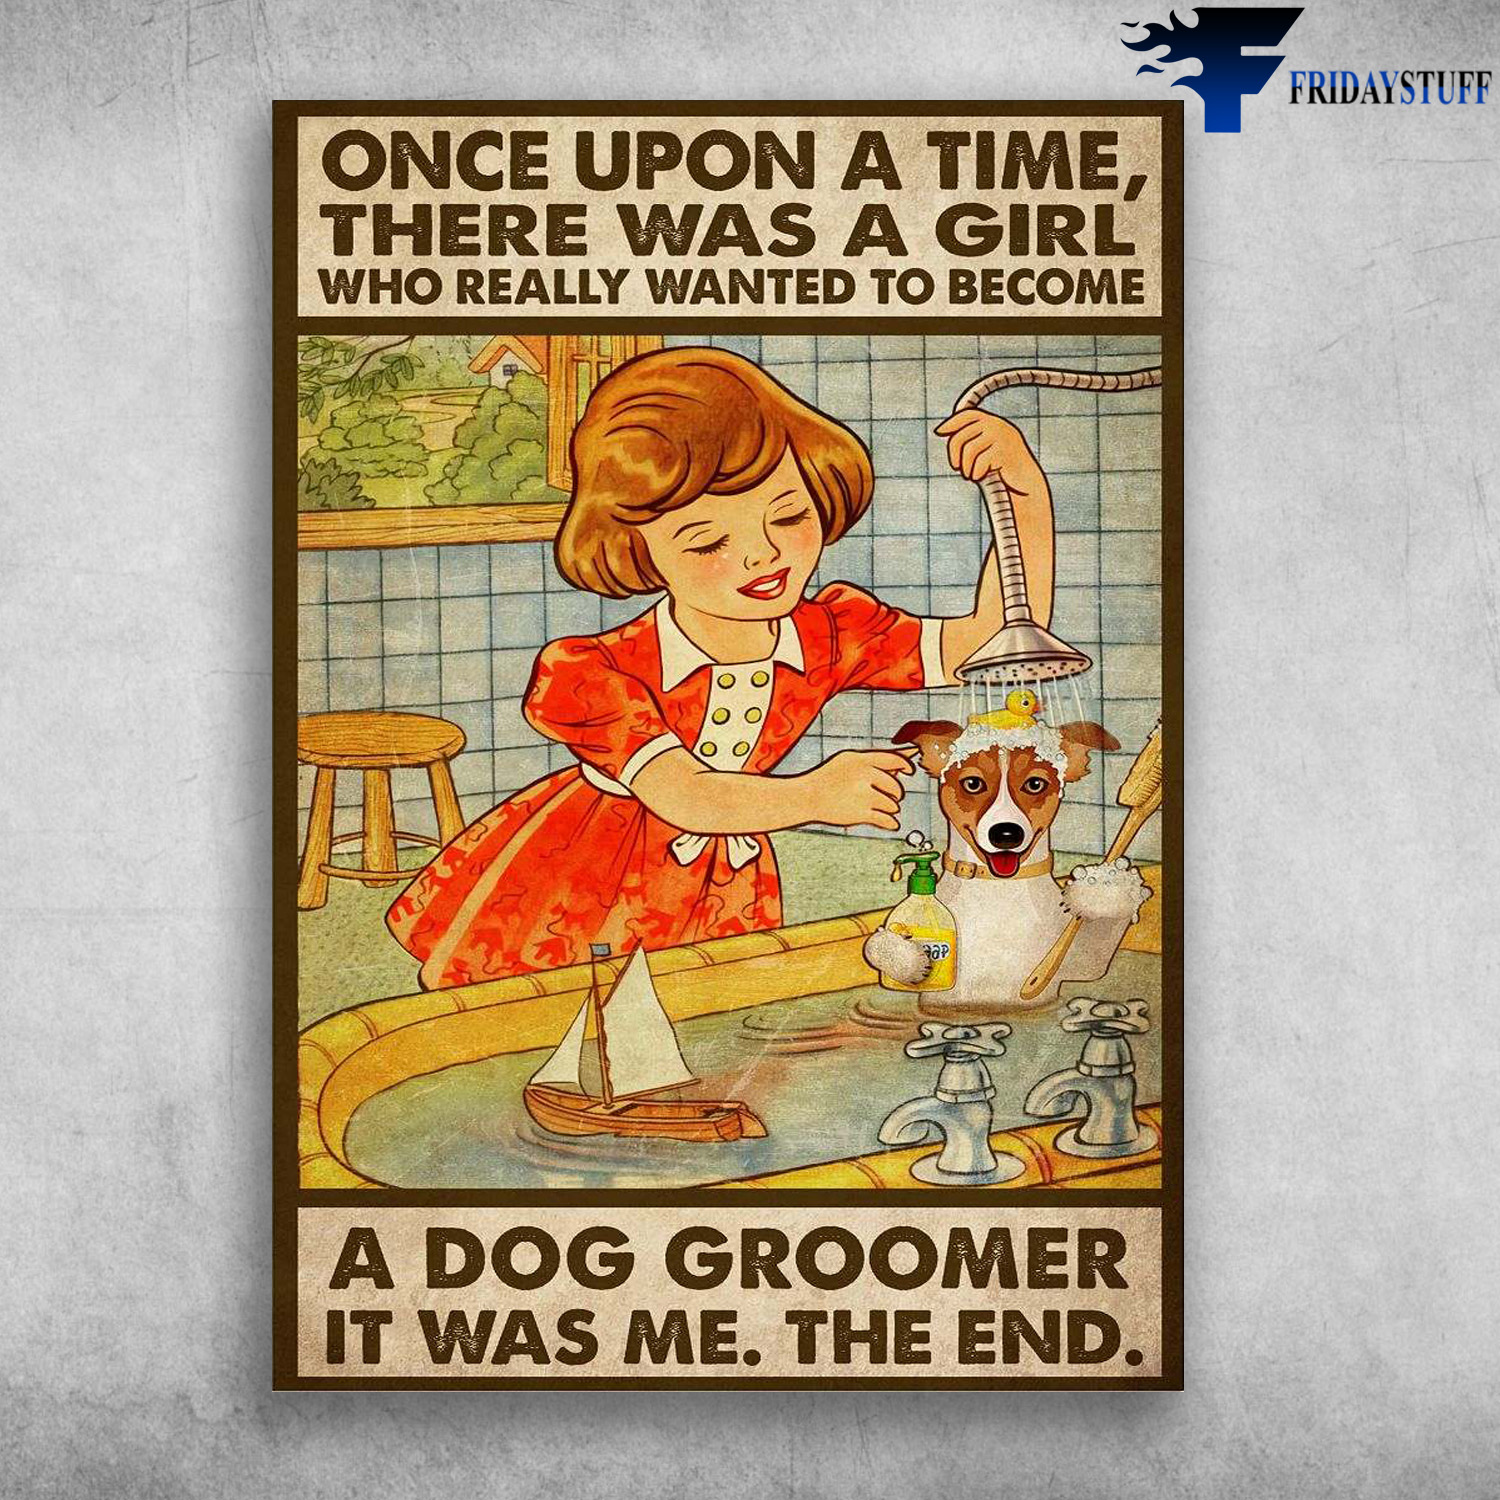 Little Dog Droomer, Girl Loves Dog - Once Upon A Time, There Was A Girl, Who Really Wanted, To Become A Dog Droomer, It Was Me, The End